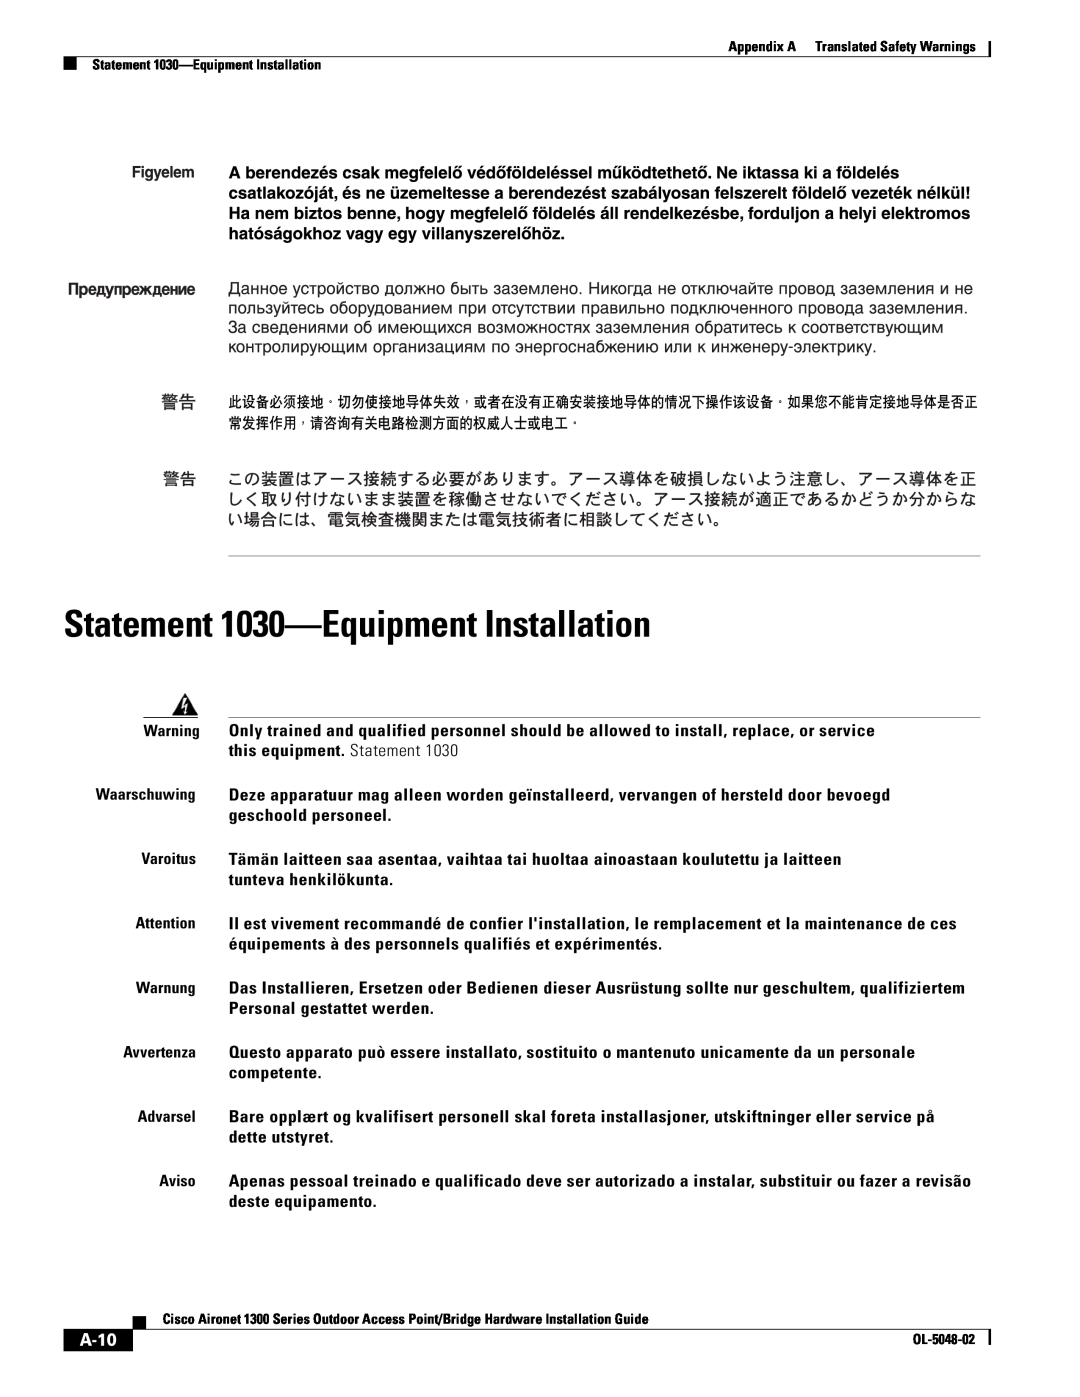 Cisco Systems 1300 Series manual Statement 1030-Equipment Installation, A-10 